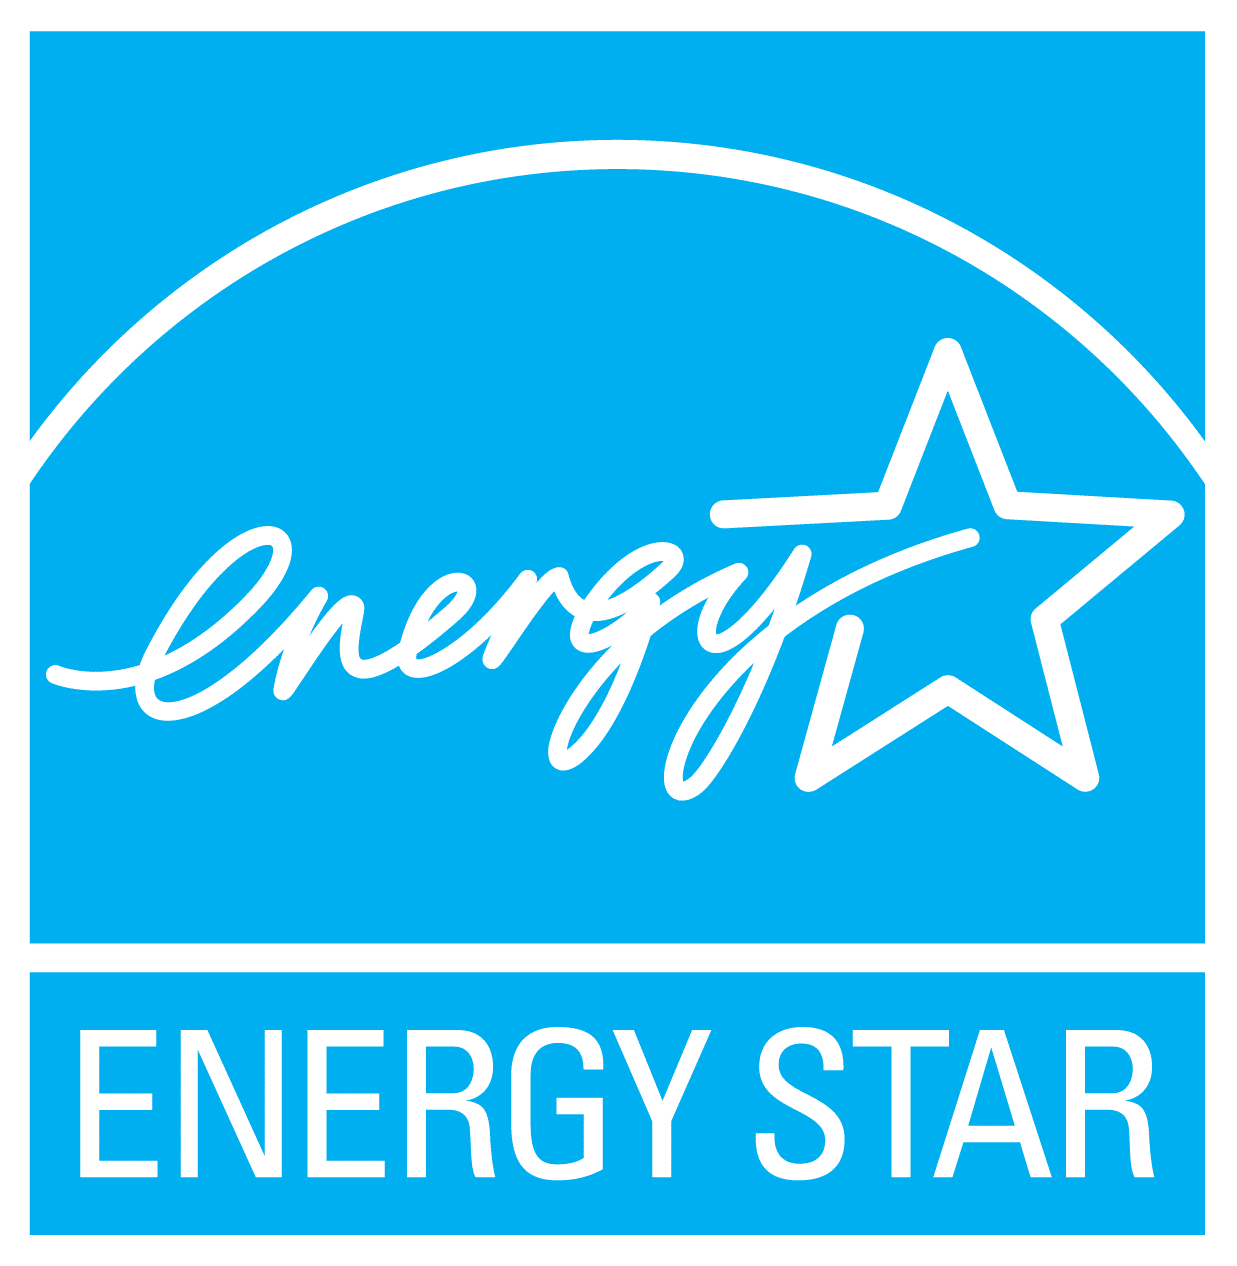 Silescent Lighting LED Lighting Fixtures are Energy Star Certified